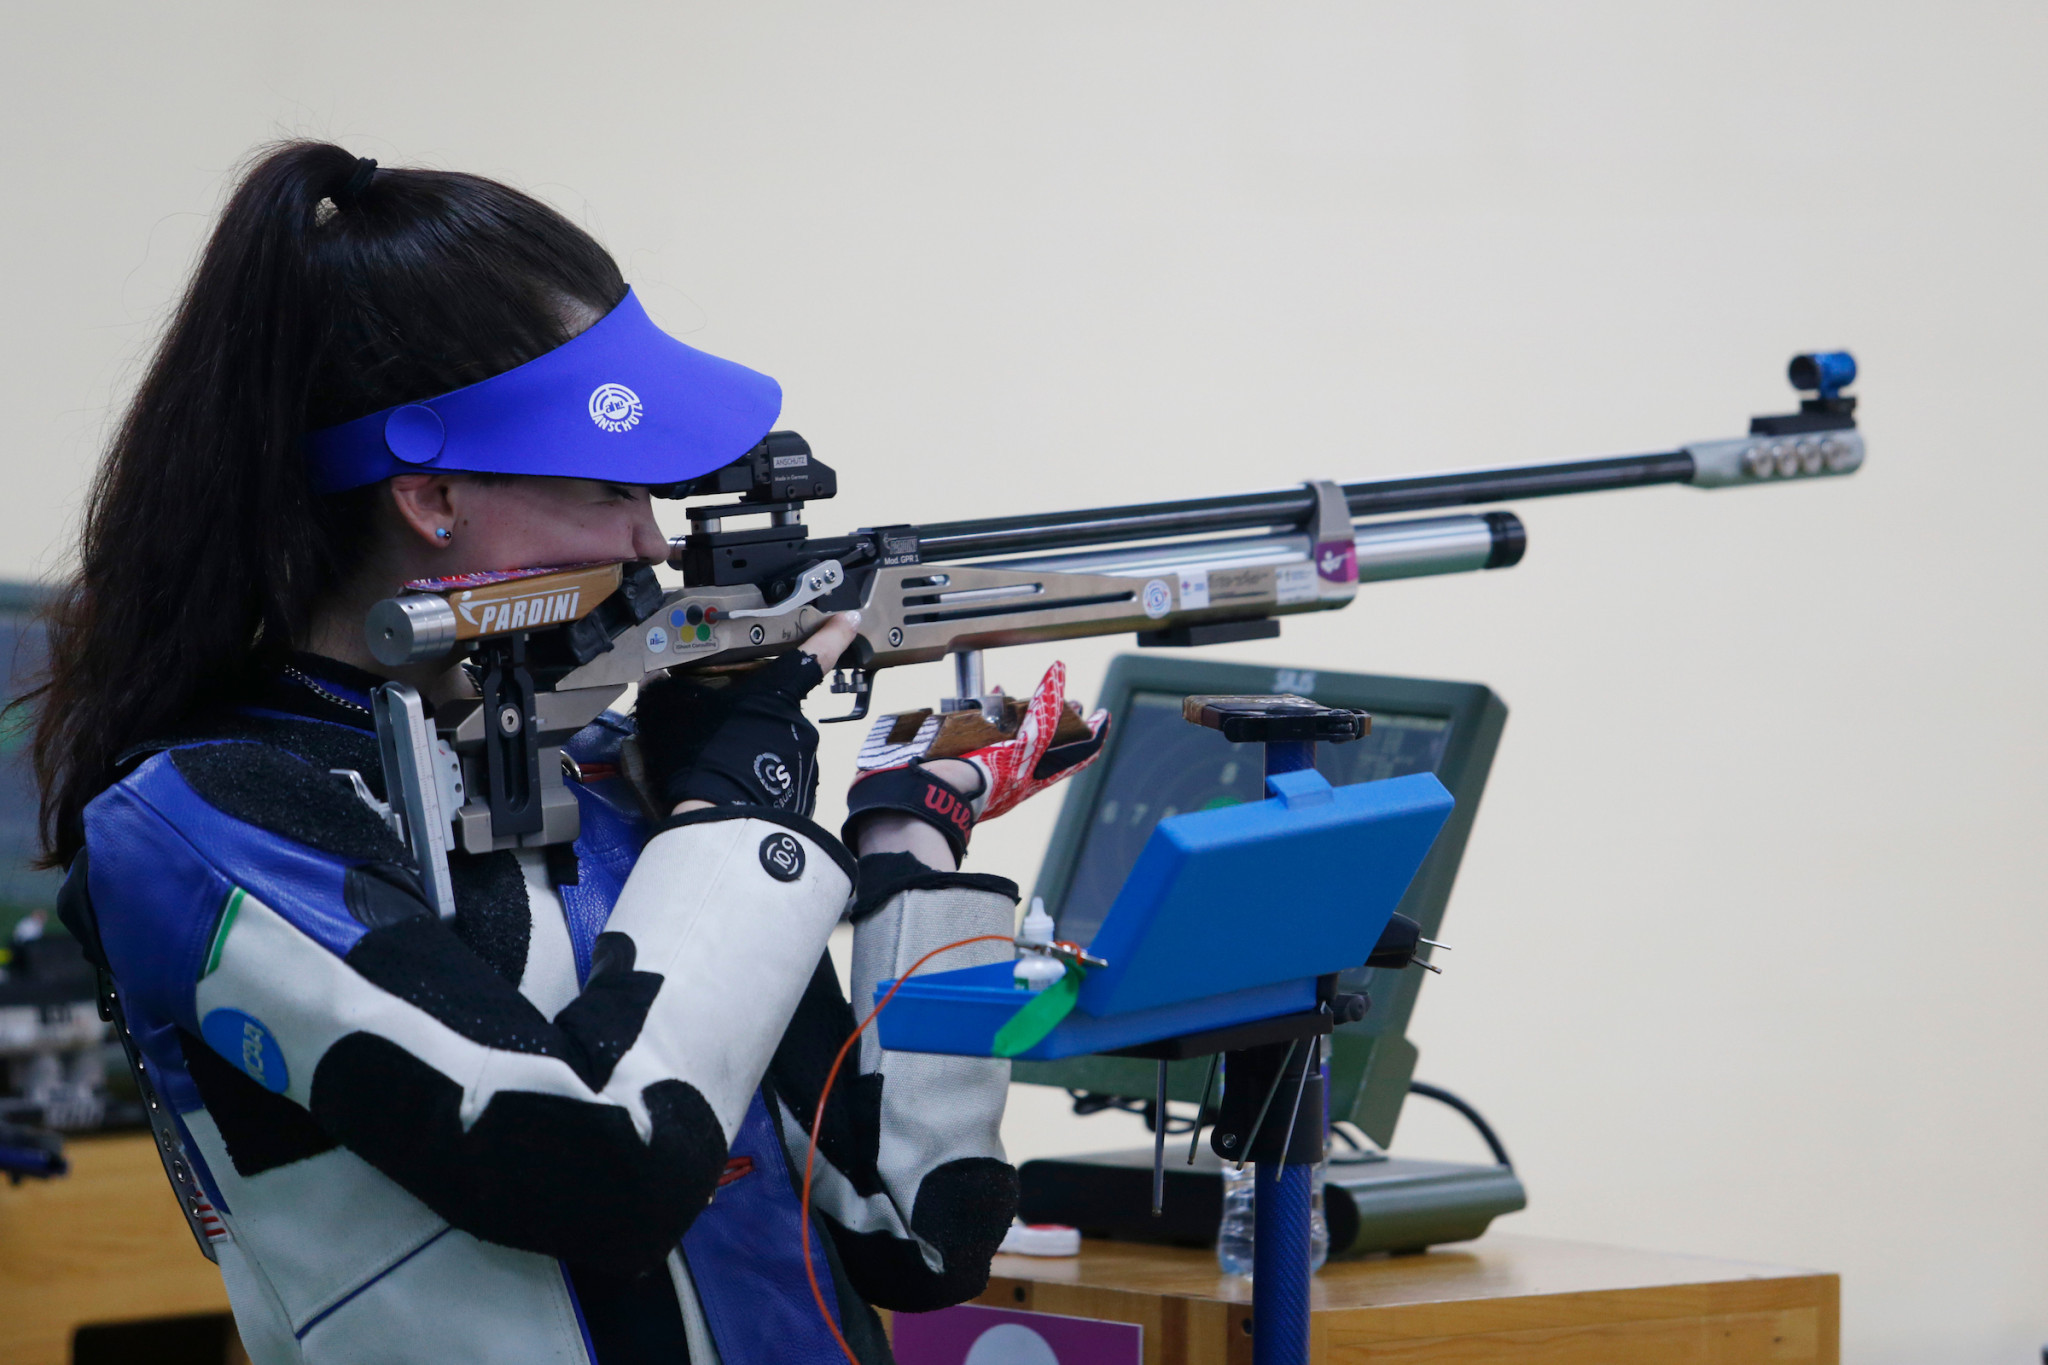  Mary Tucker of the United States shot 251 points to claim the women's air rifle shooting crown ©Agencia.Xpress Media